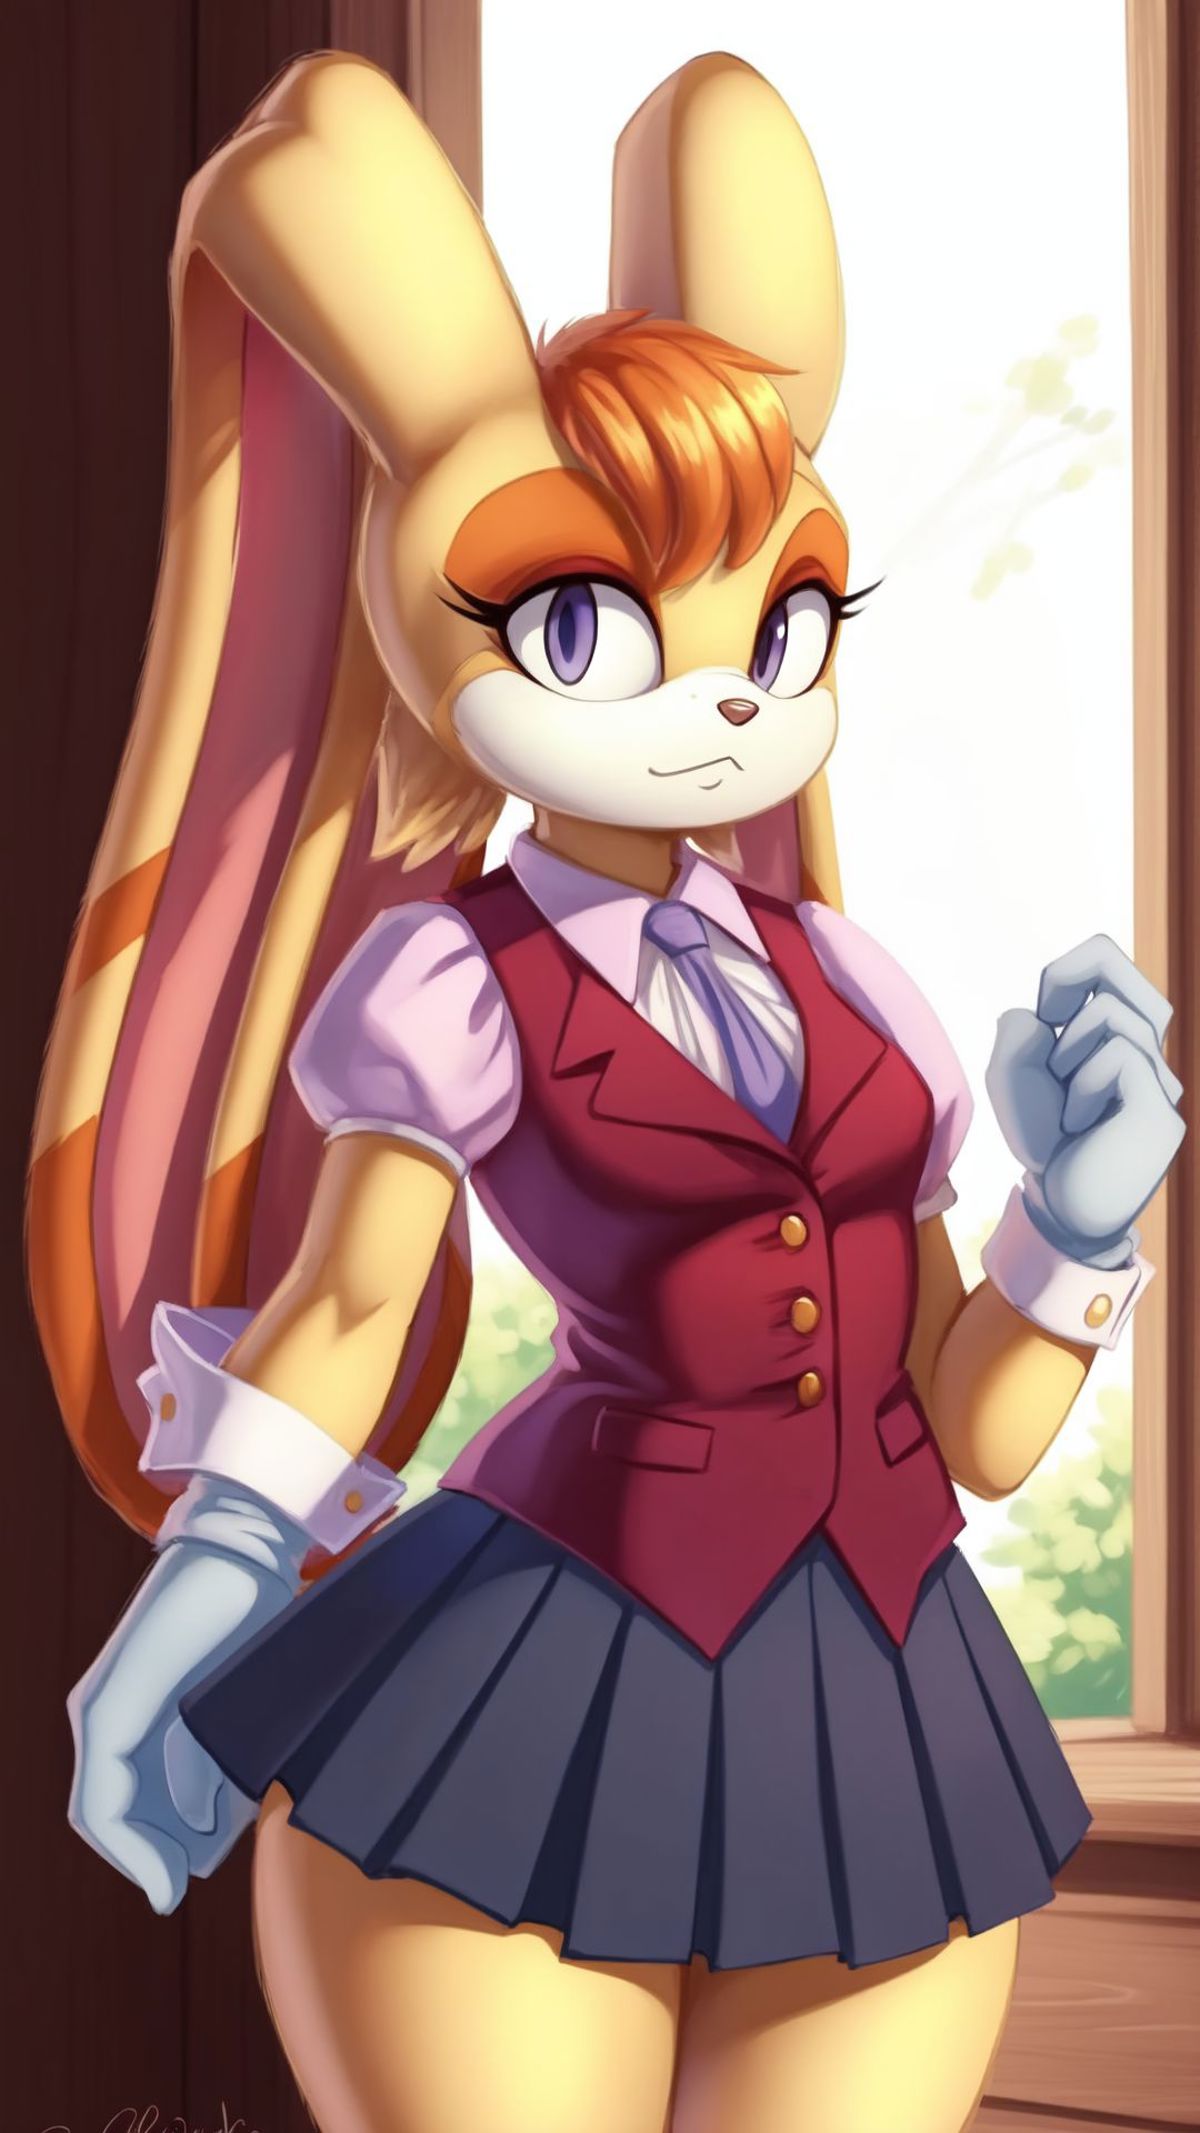 Vanilla the Rabbit (Character) image by marusame